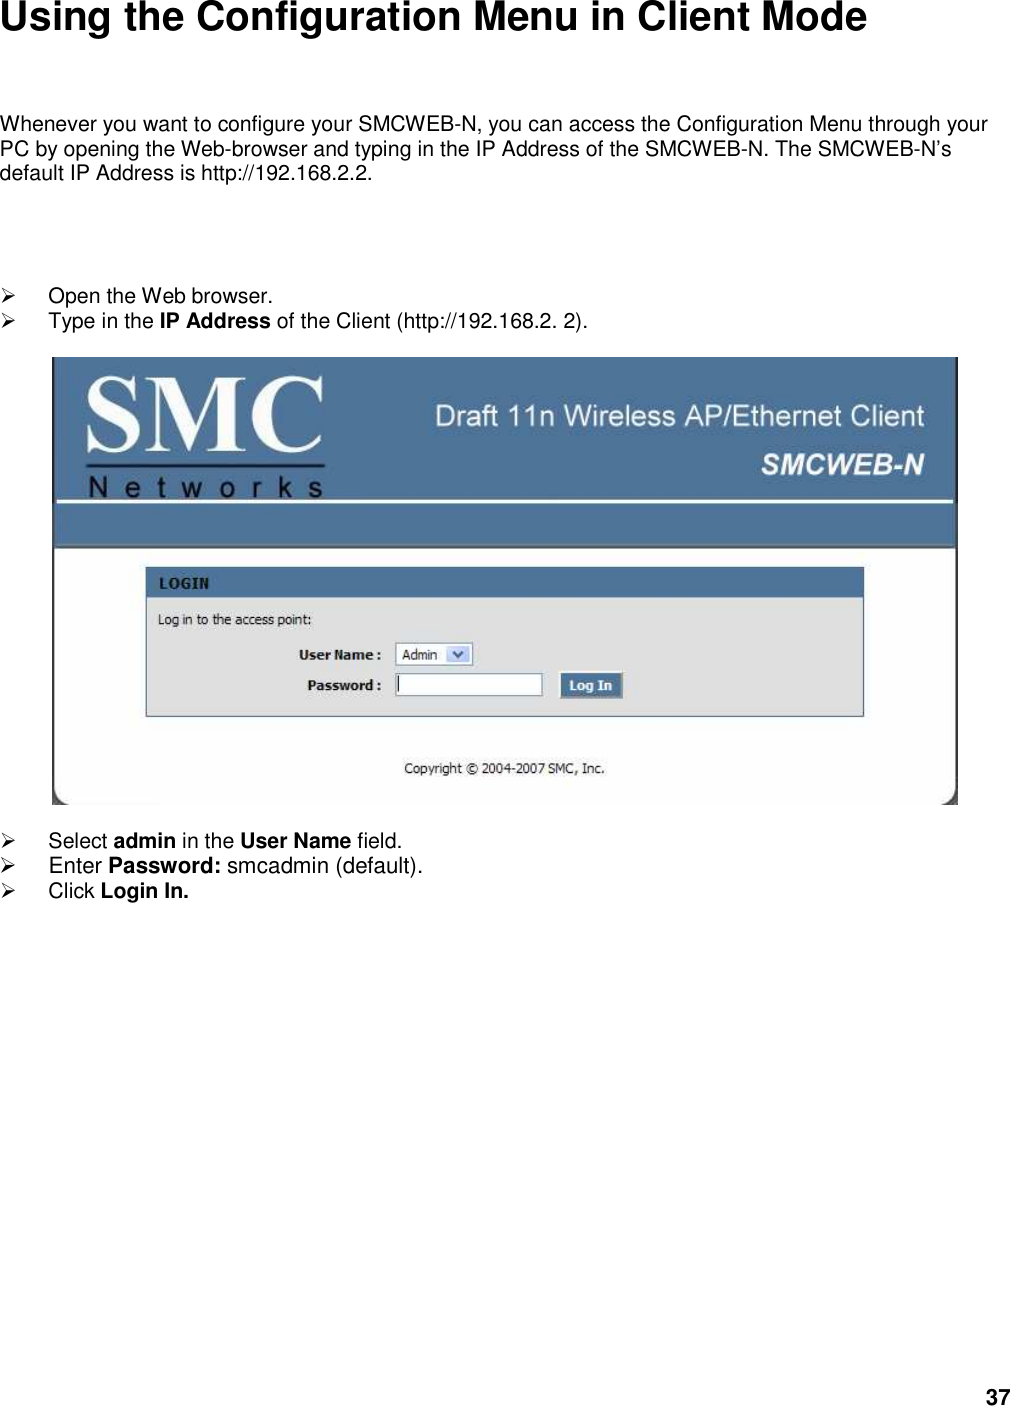 37 Using the Configuration Menu in Client Mode Whenever you want to configure your SMCWEB-N, you can access the Configuration Menu through your PC by opening the Web-browser and typing in the IP Address of the SMCWEB-N. The SMCWEB-N’s default IP Address is http://192.168.2.2.    Open the Web browser.   Type in the IP Address of the Client (http://192.168.2. 2).      Select admin in the User Name field.   Enter Password: smcadmin (default).   Click Login In.                    